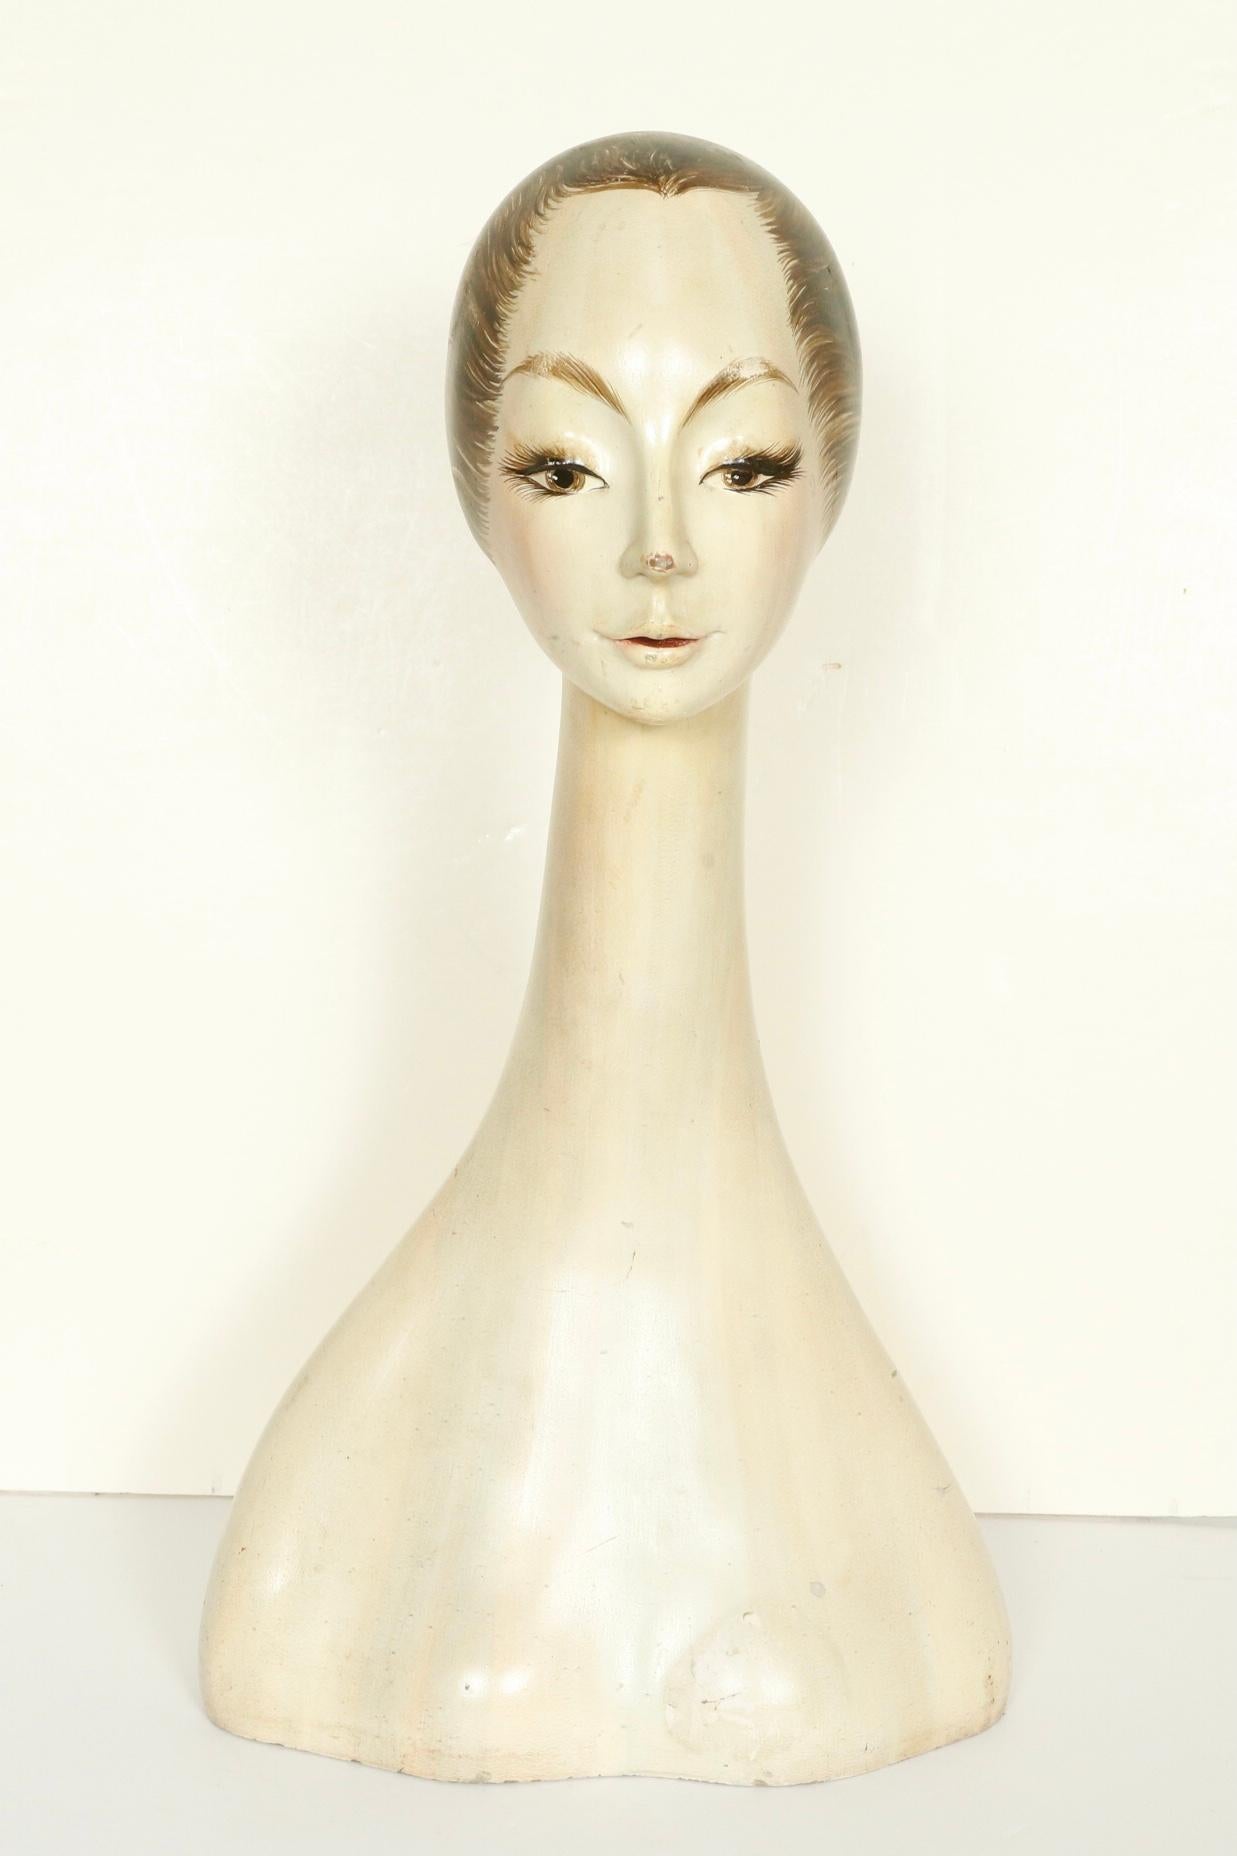 Antique log nck mannequin bust for hat and scarf display.  Signed the Petite Faye model.

Hand painted papier mache.

France, circa 1920.

Dimensions: 24.75” H x 13” W x 7.5” D